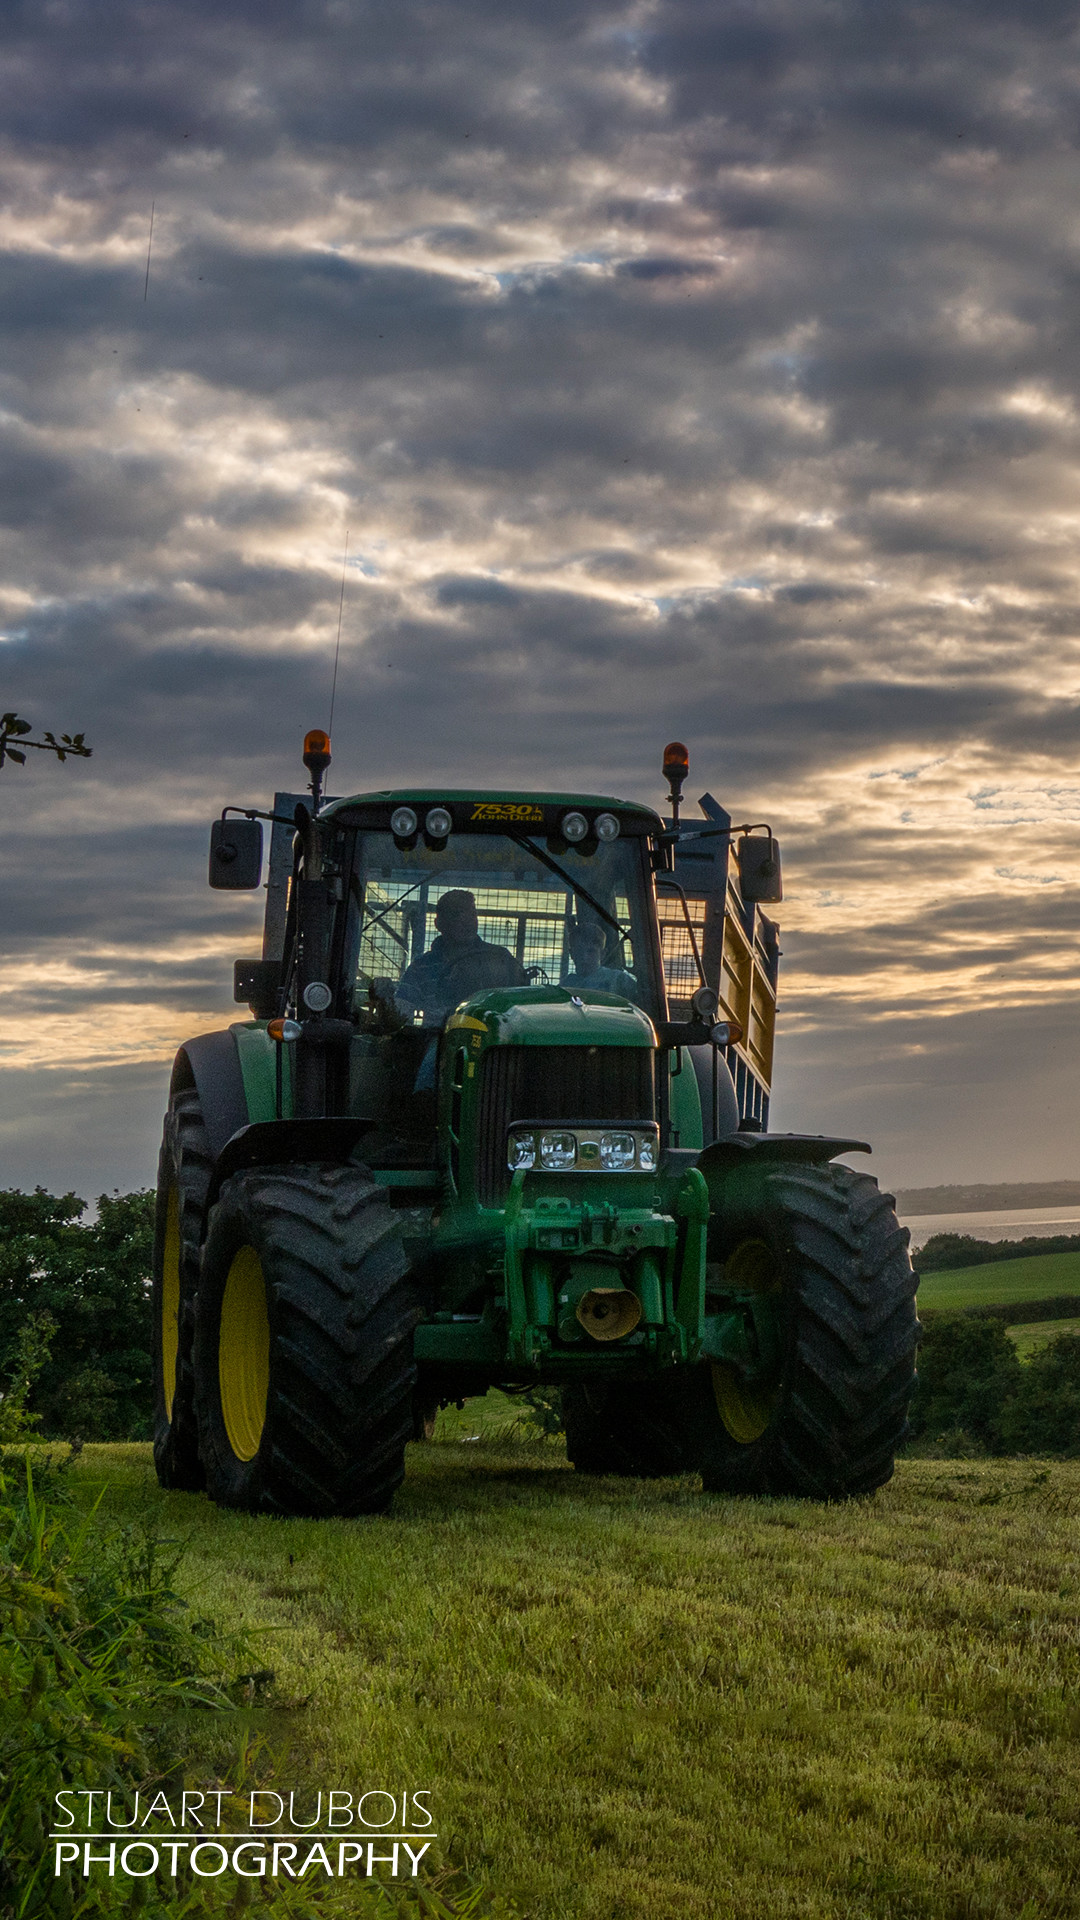 john deere wallpaper hd,land vehicle,vehicle,tractor,nature,agricultural machinery